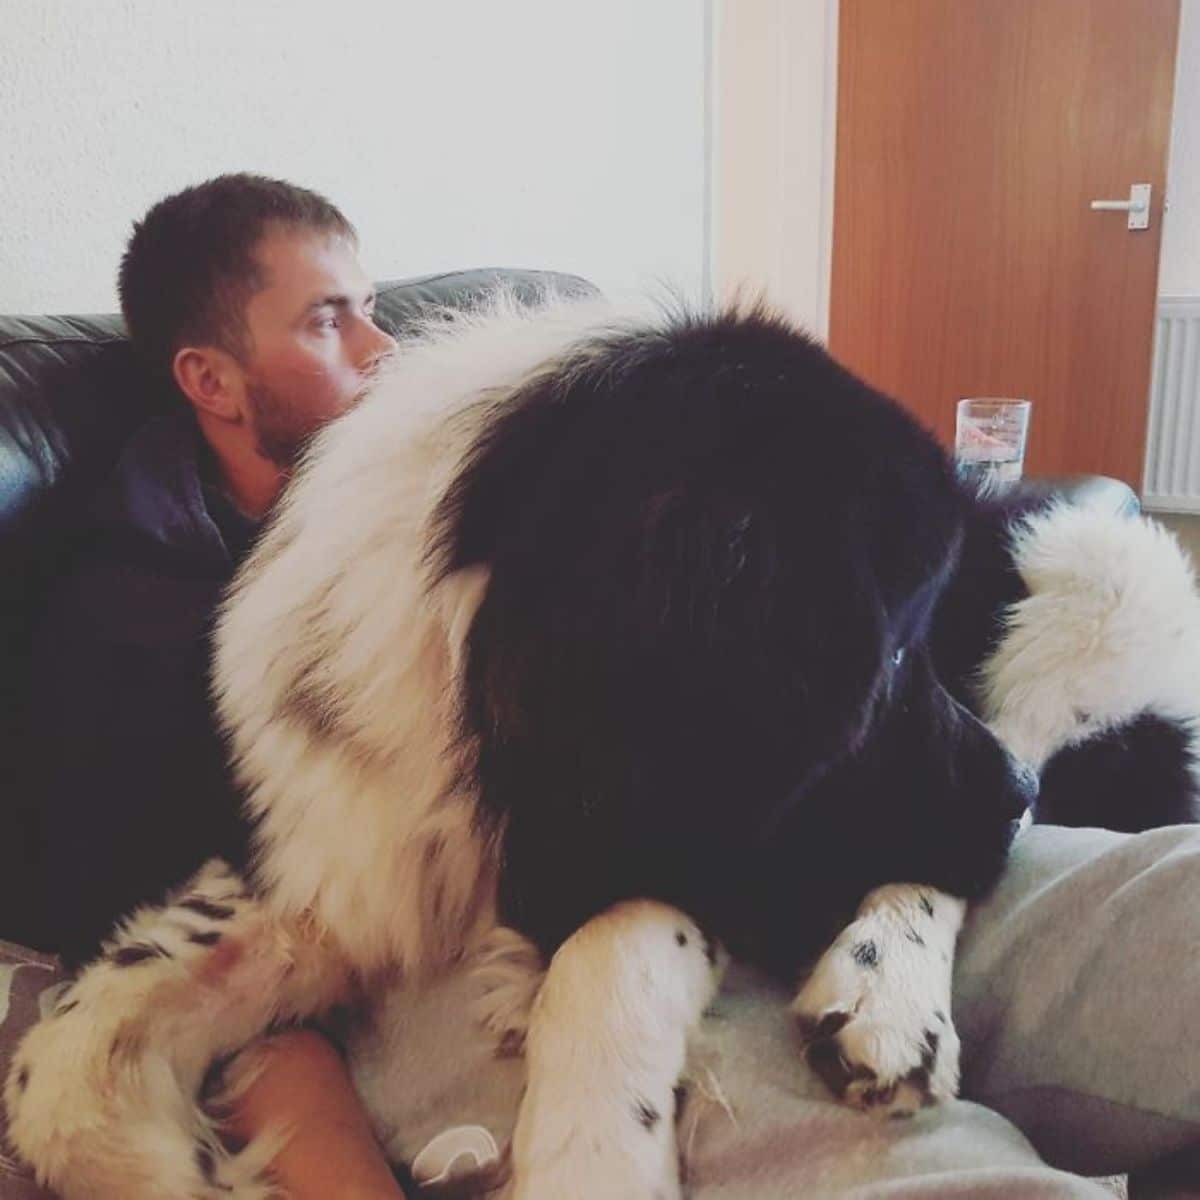 large fluffy black and white dog laying on a man's lap